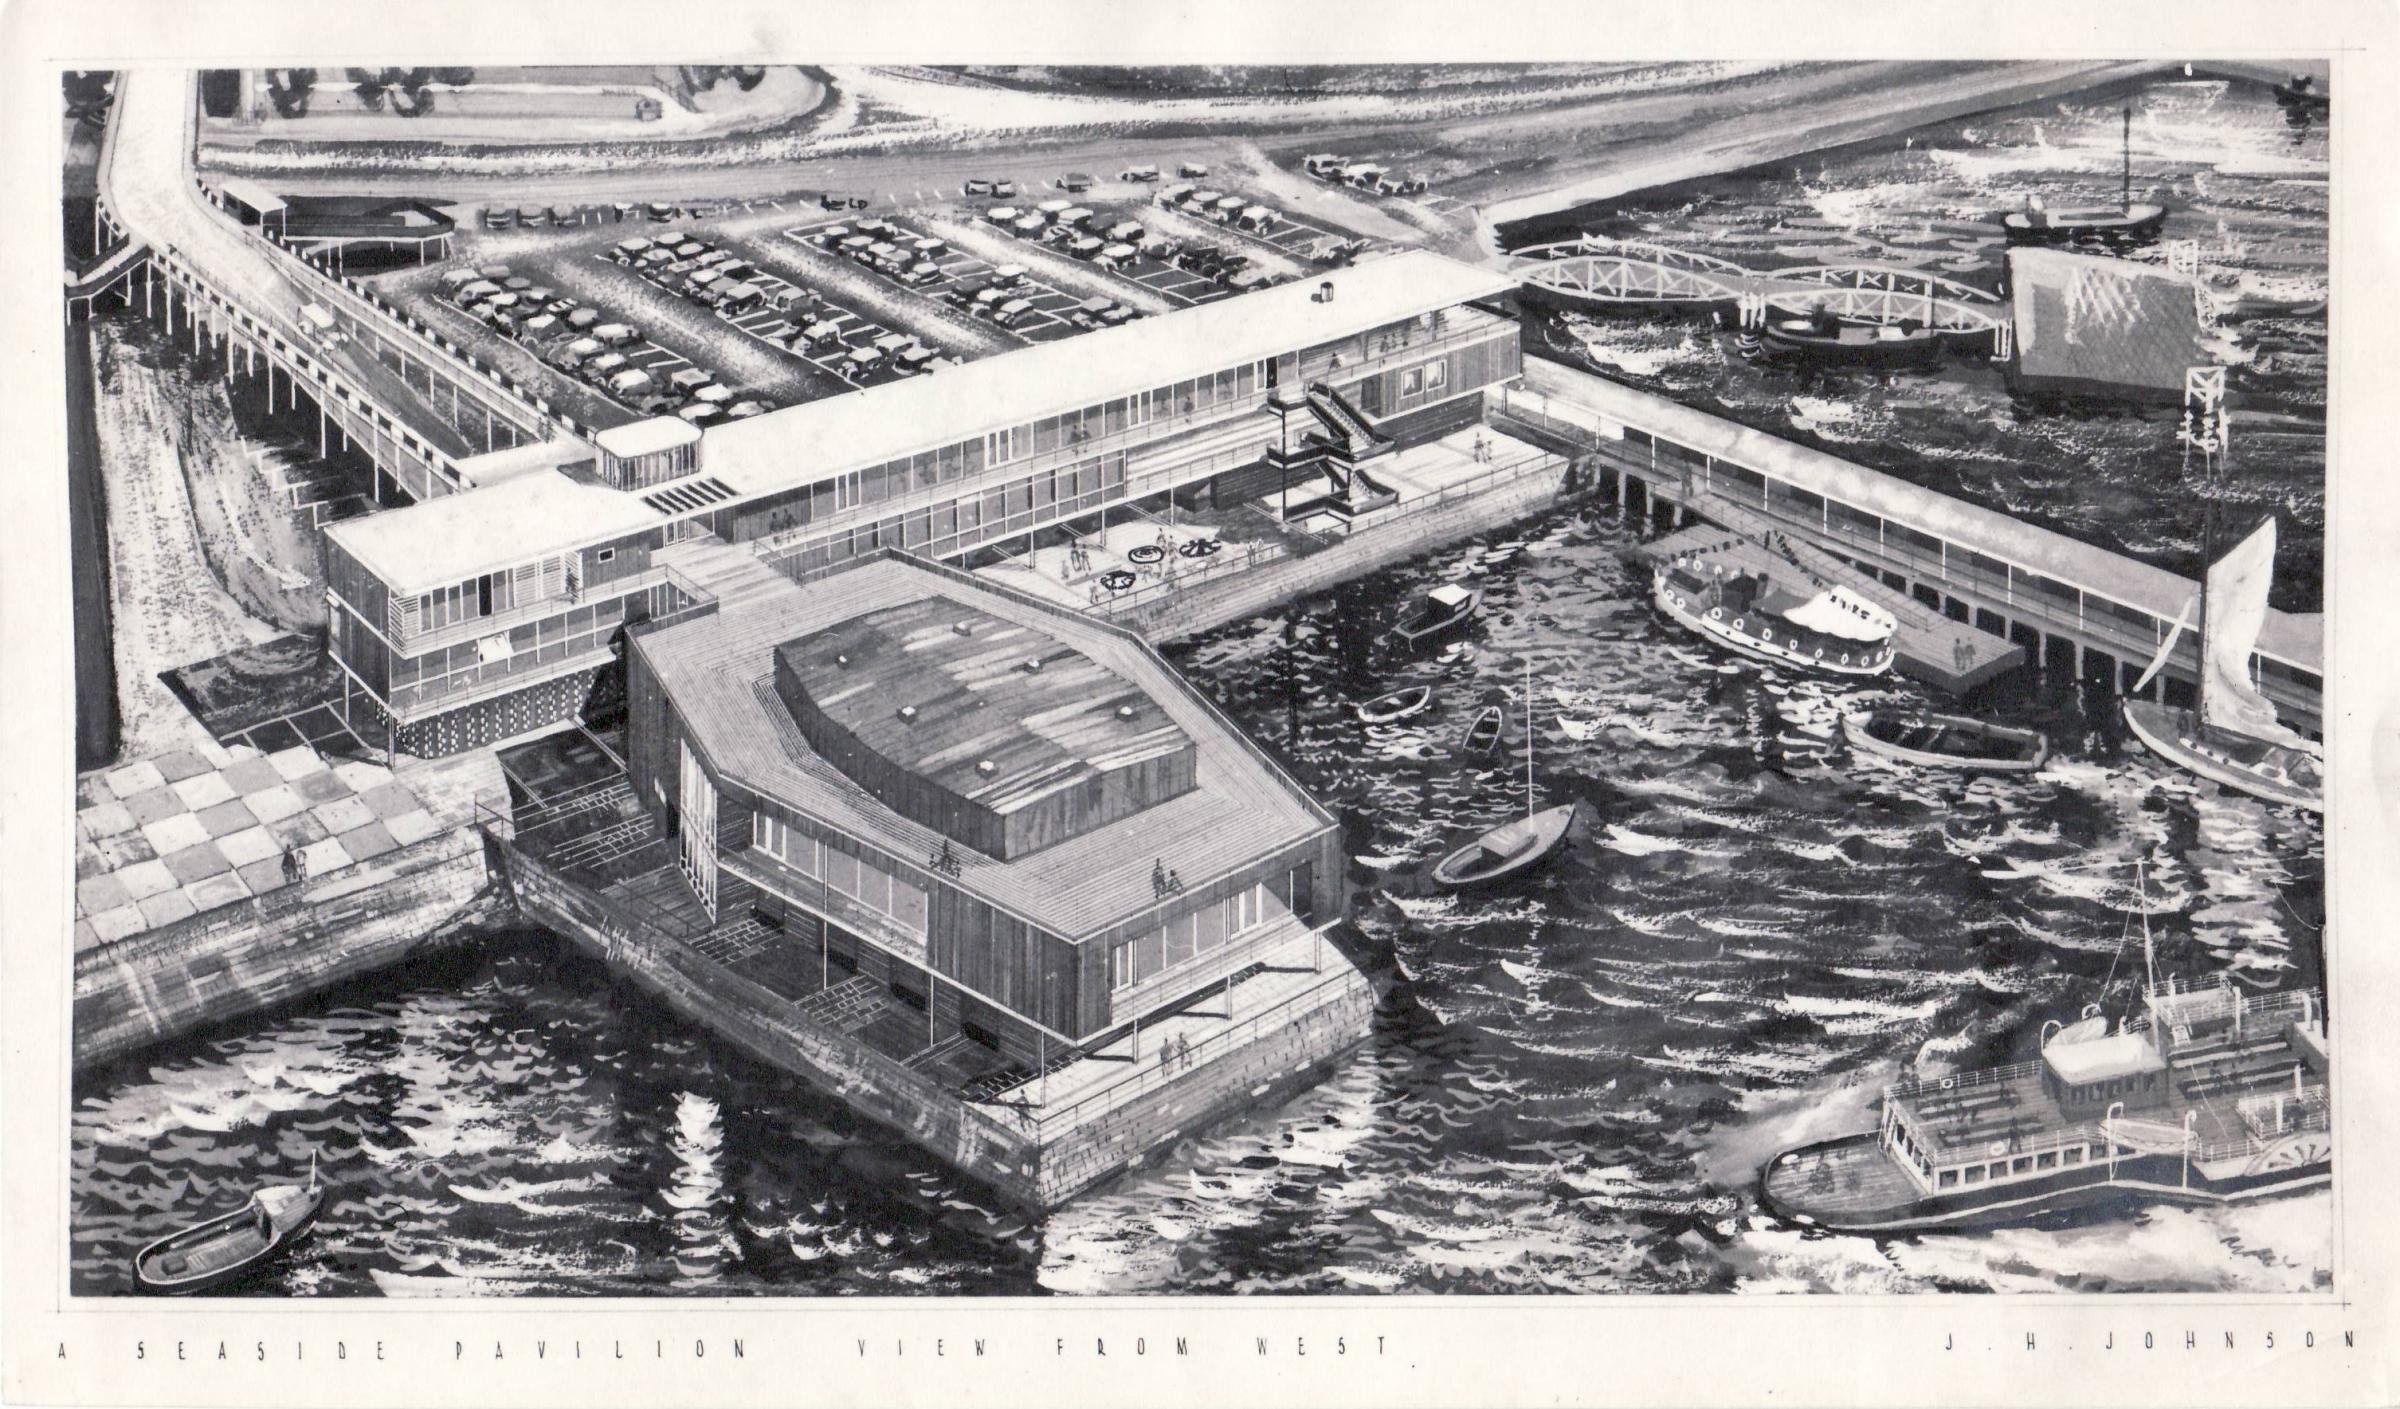 artist impression of mayflower park and royal pier area from the 1950s for a proposed development called A Seaside Pavillion